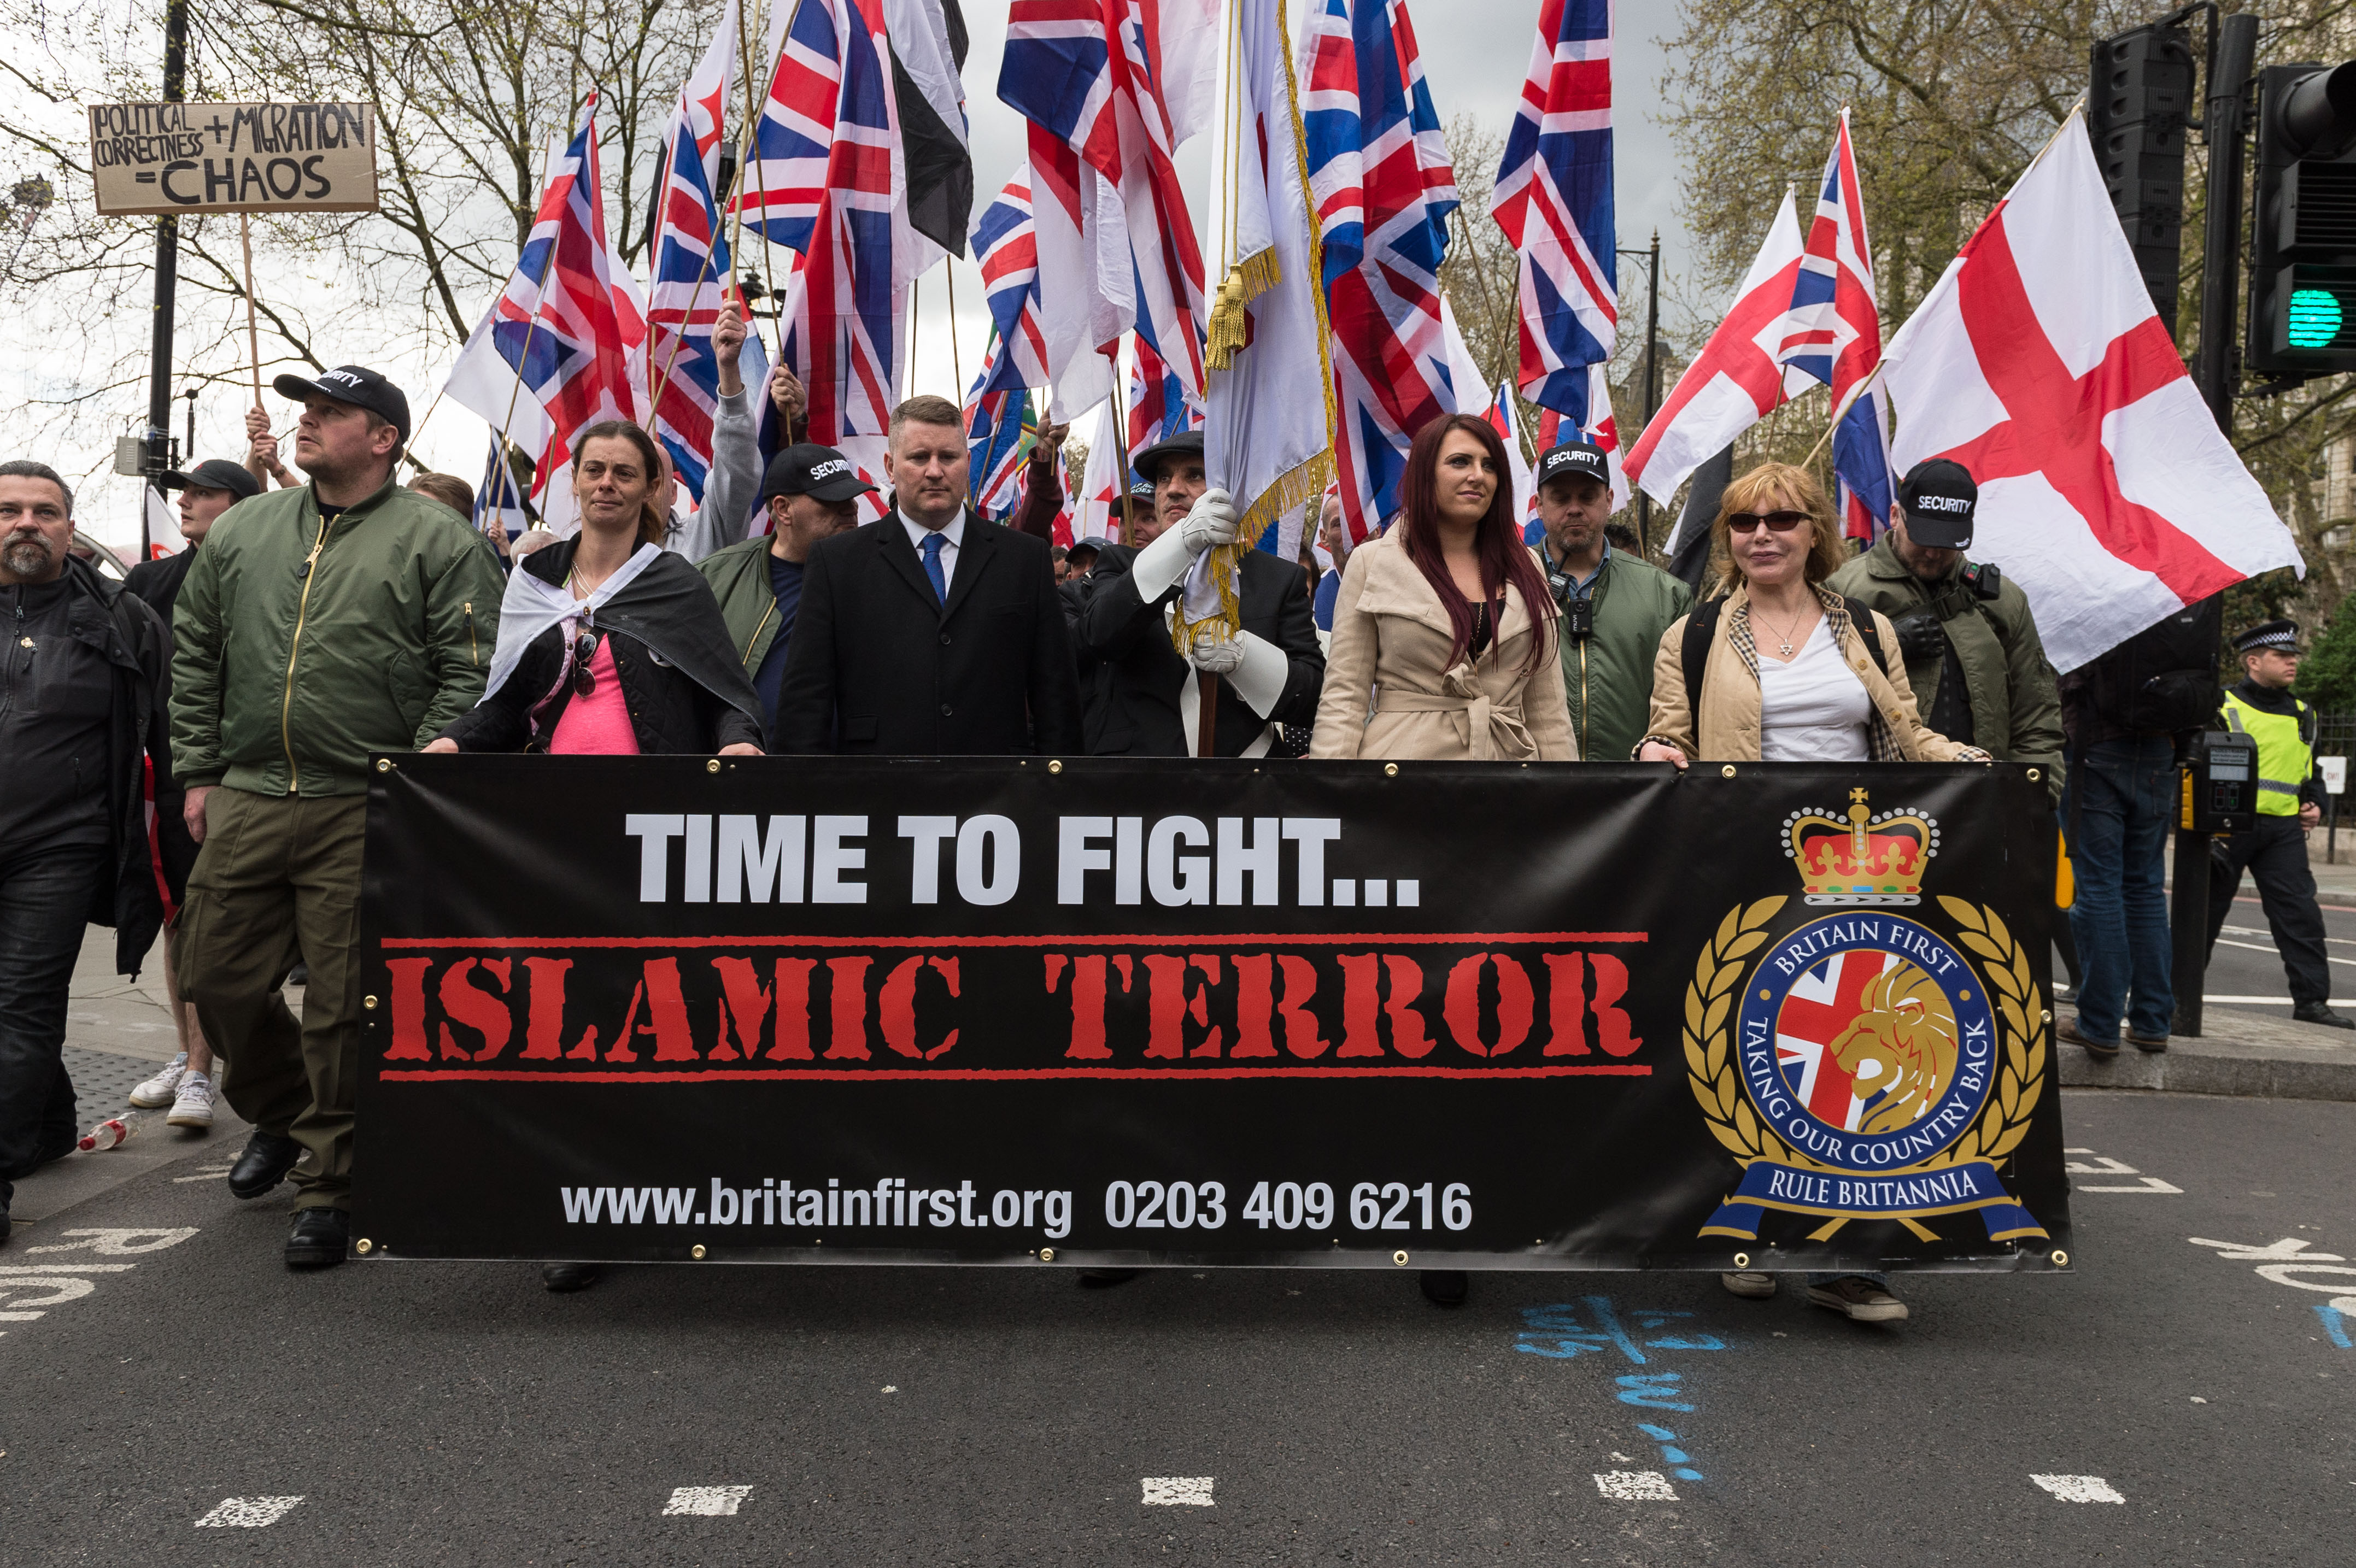 Britain First leaders Jayda Fransen (2R) and Paul Golding (3L) lead March Against Terrorism on April 01, 2017 in London, England. (Wiktor Szymanowicz— Barcroft Im—Barcroft Media via Getty Images)